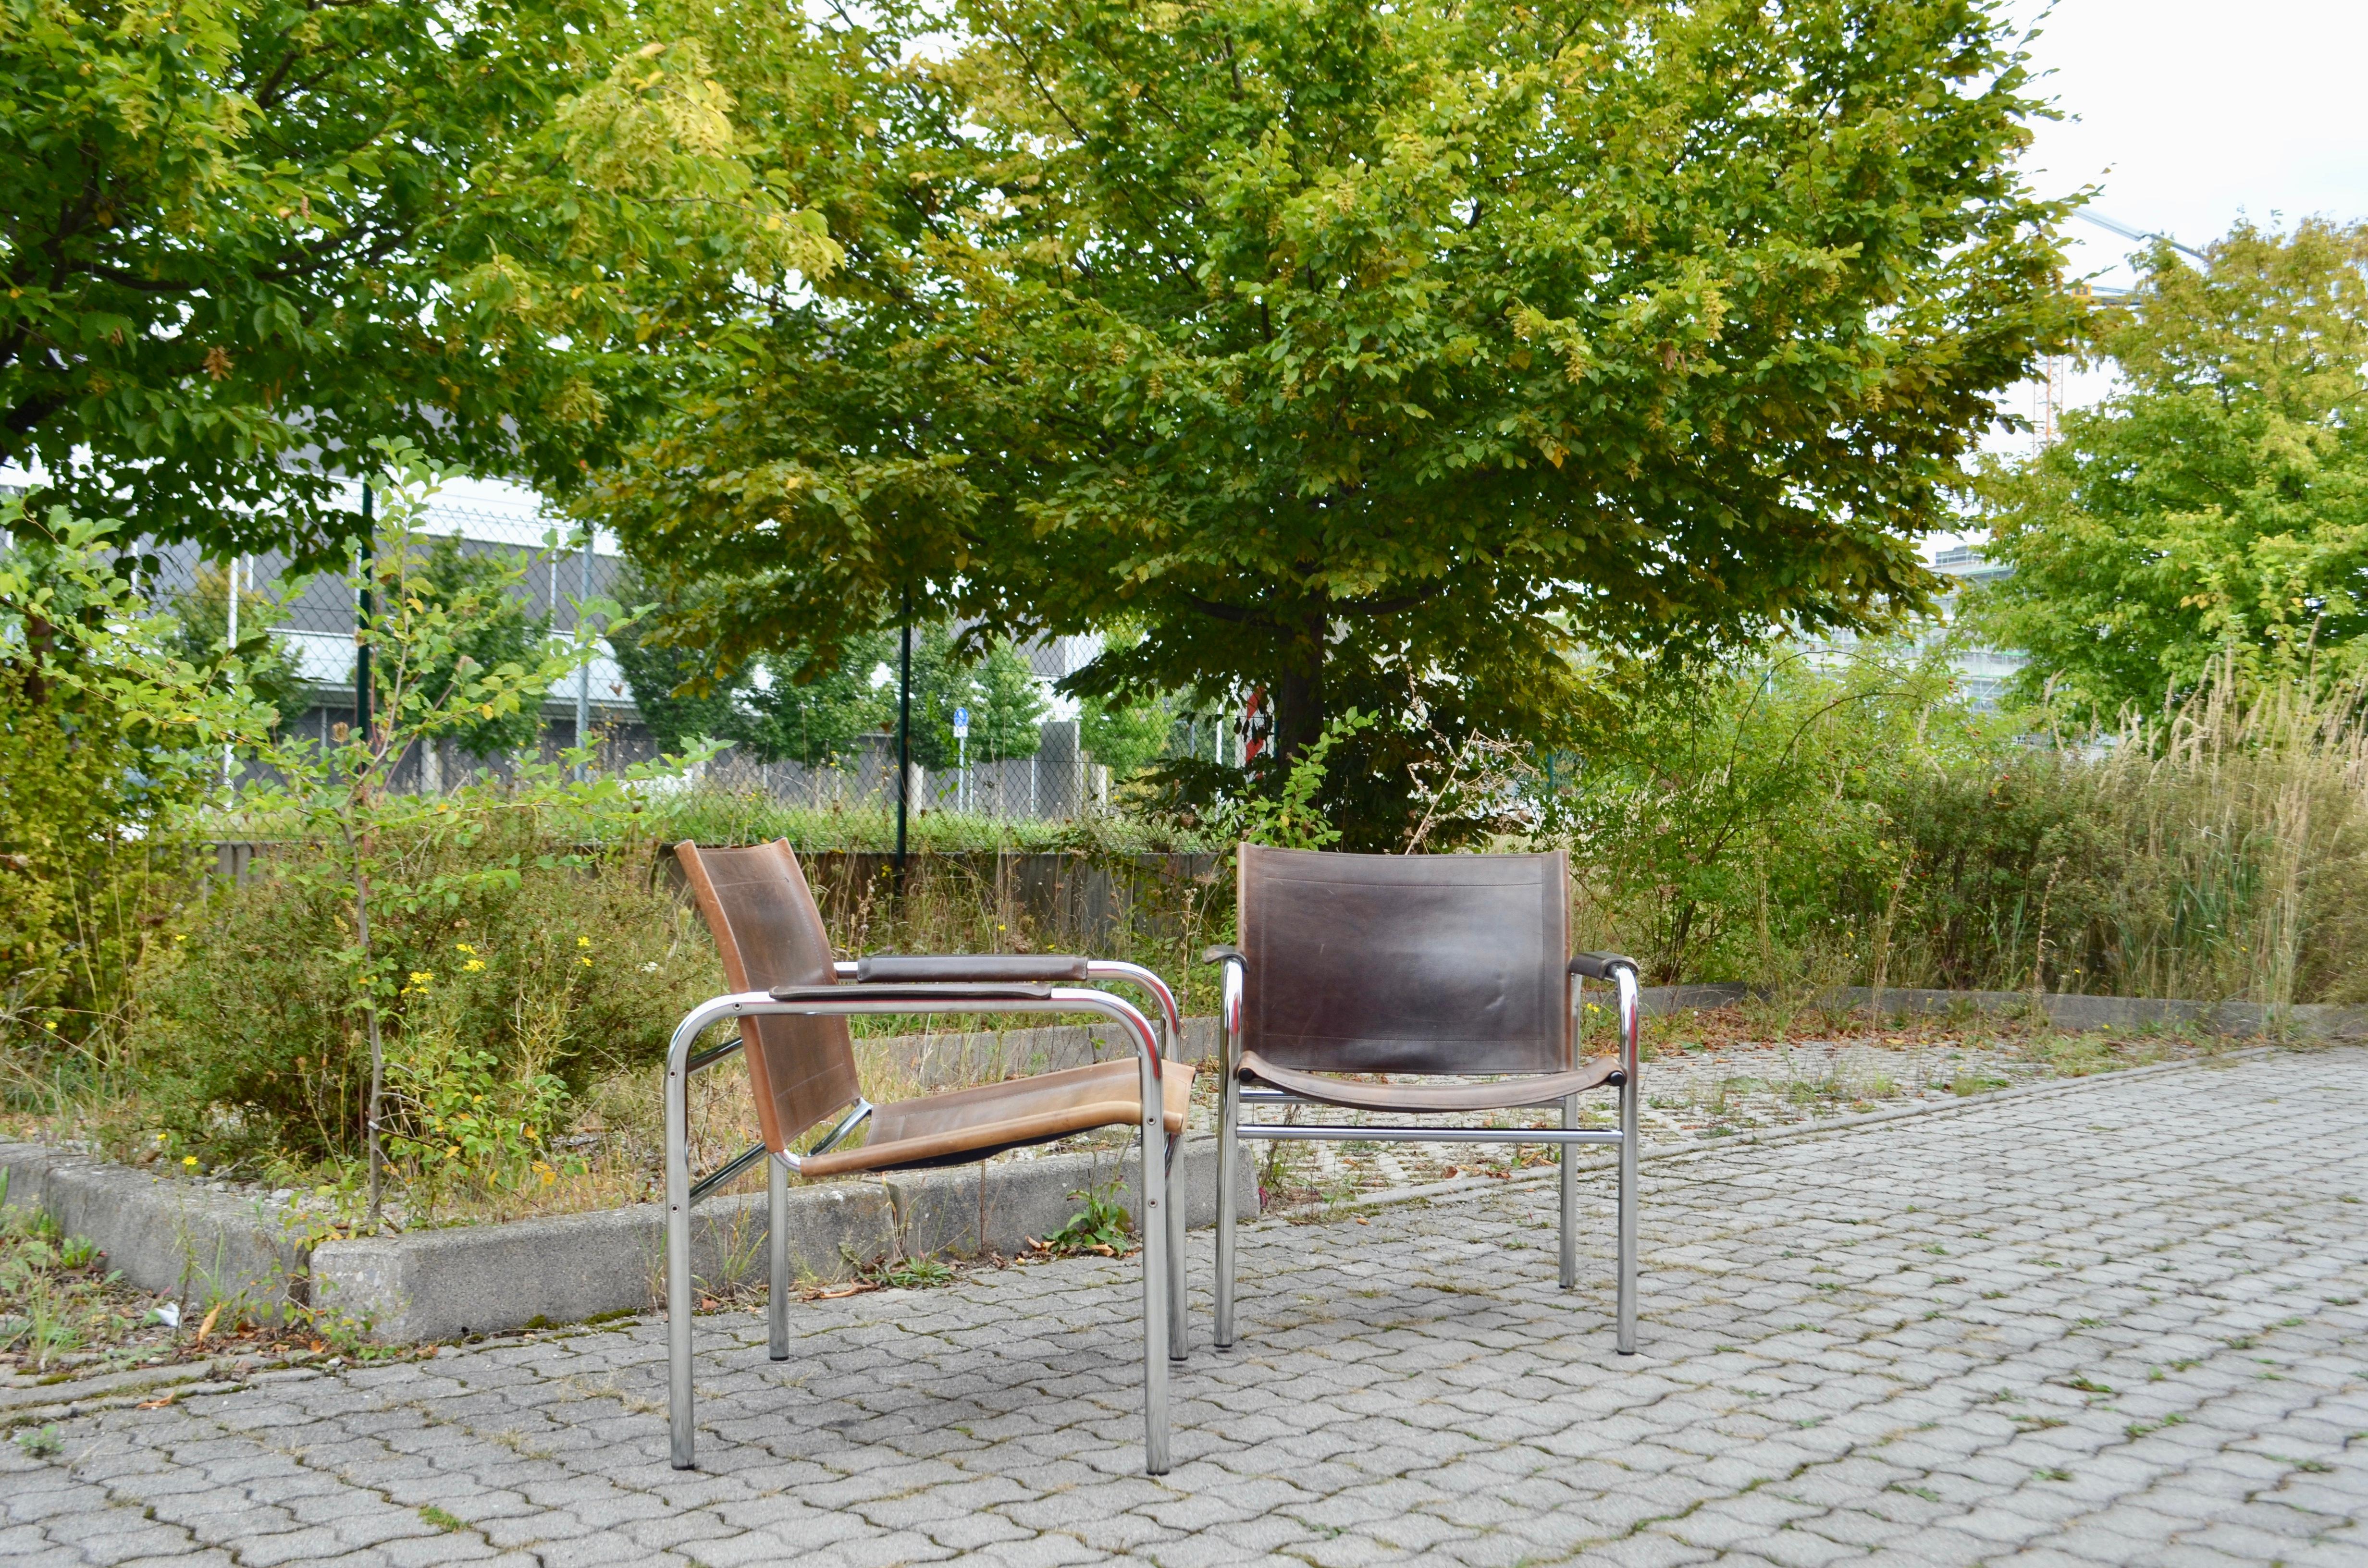 Ikea Modell Klinte design by Tord Bjorklund in the 80ties.
Comfortable Lounge Chairs.A classic design from Tord Bjorklund.
Brown thick Saddle leather and chromed tubular steel.
The leather is beautiful patinated.
Great quality.
Set of 2.